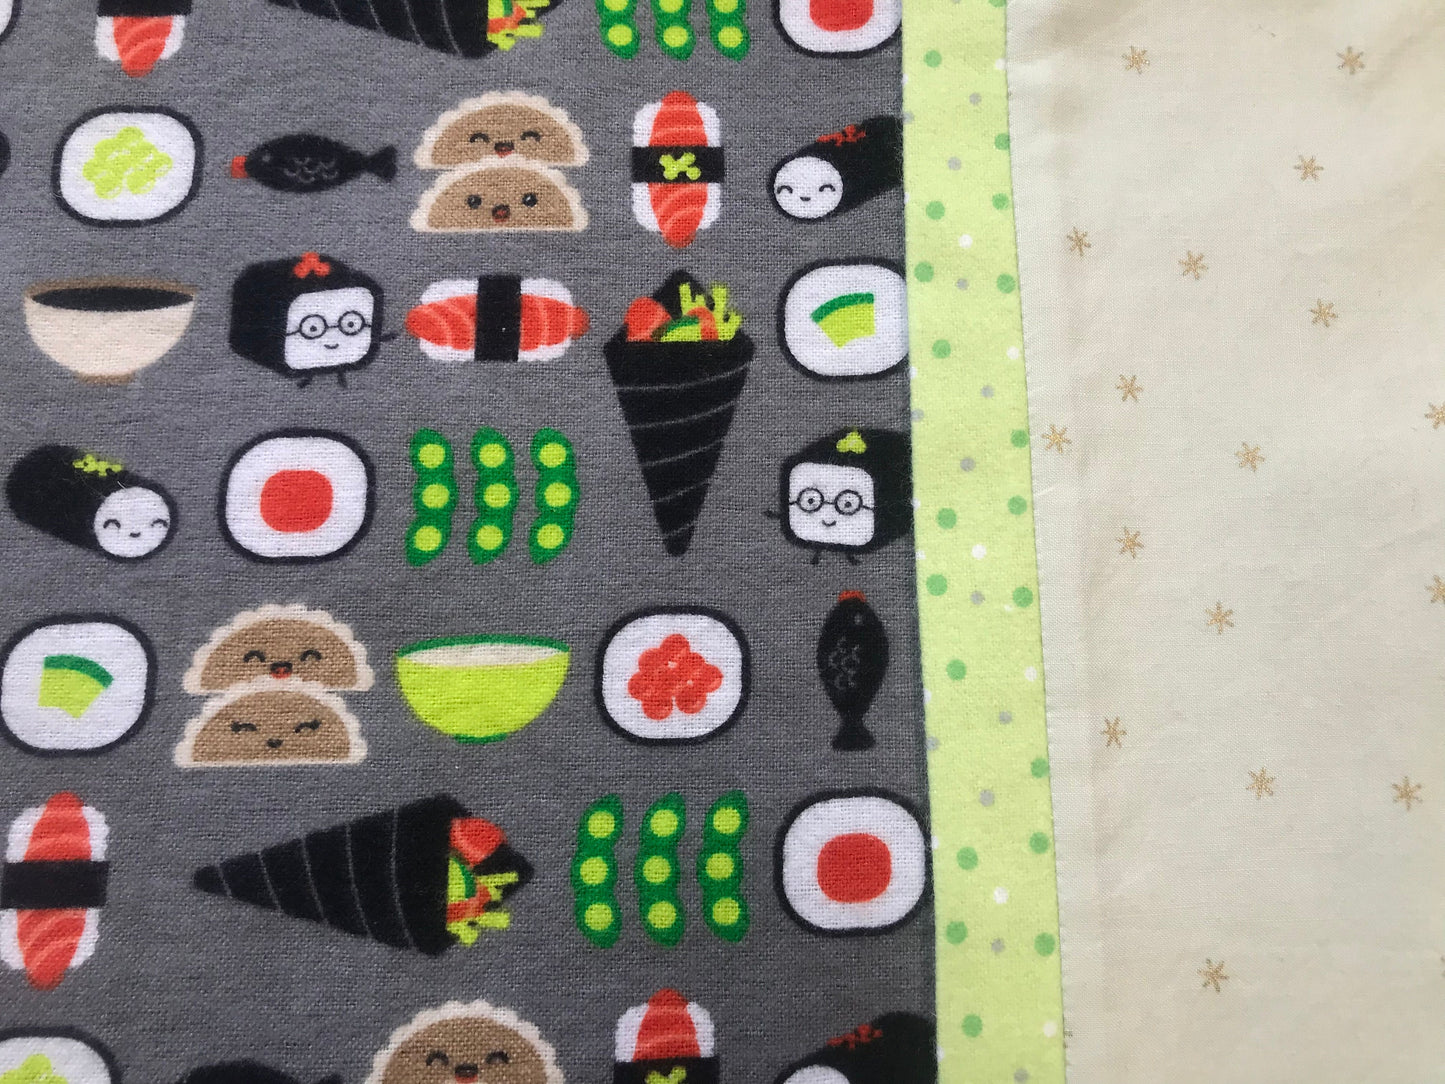 Kawaii sushi flannel pillow case, sushi pillow, sushi camp print pillow, small cute sushi pillow. Machine washable.